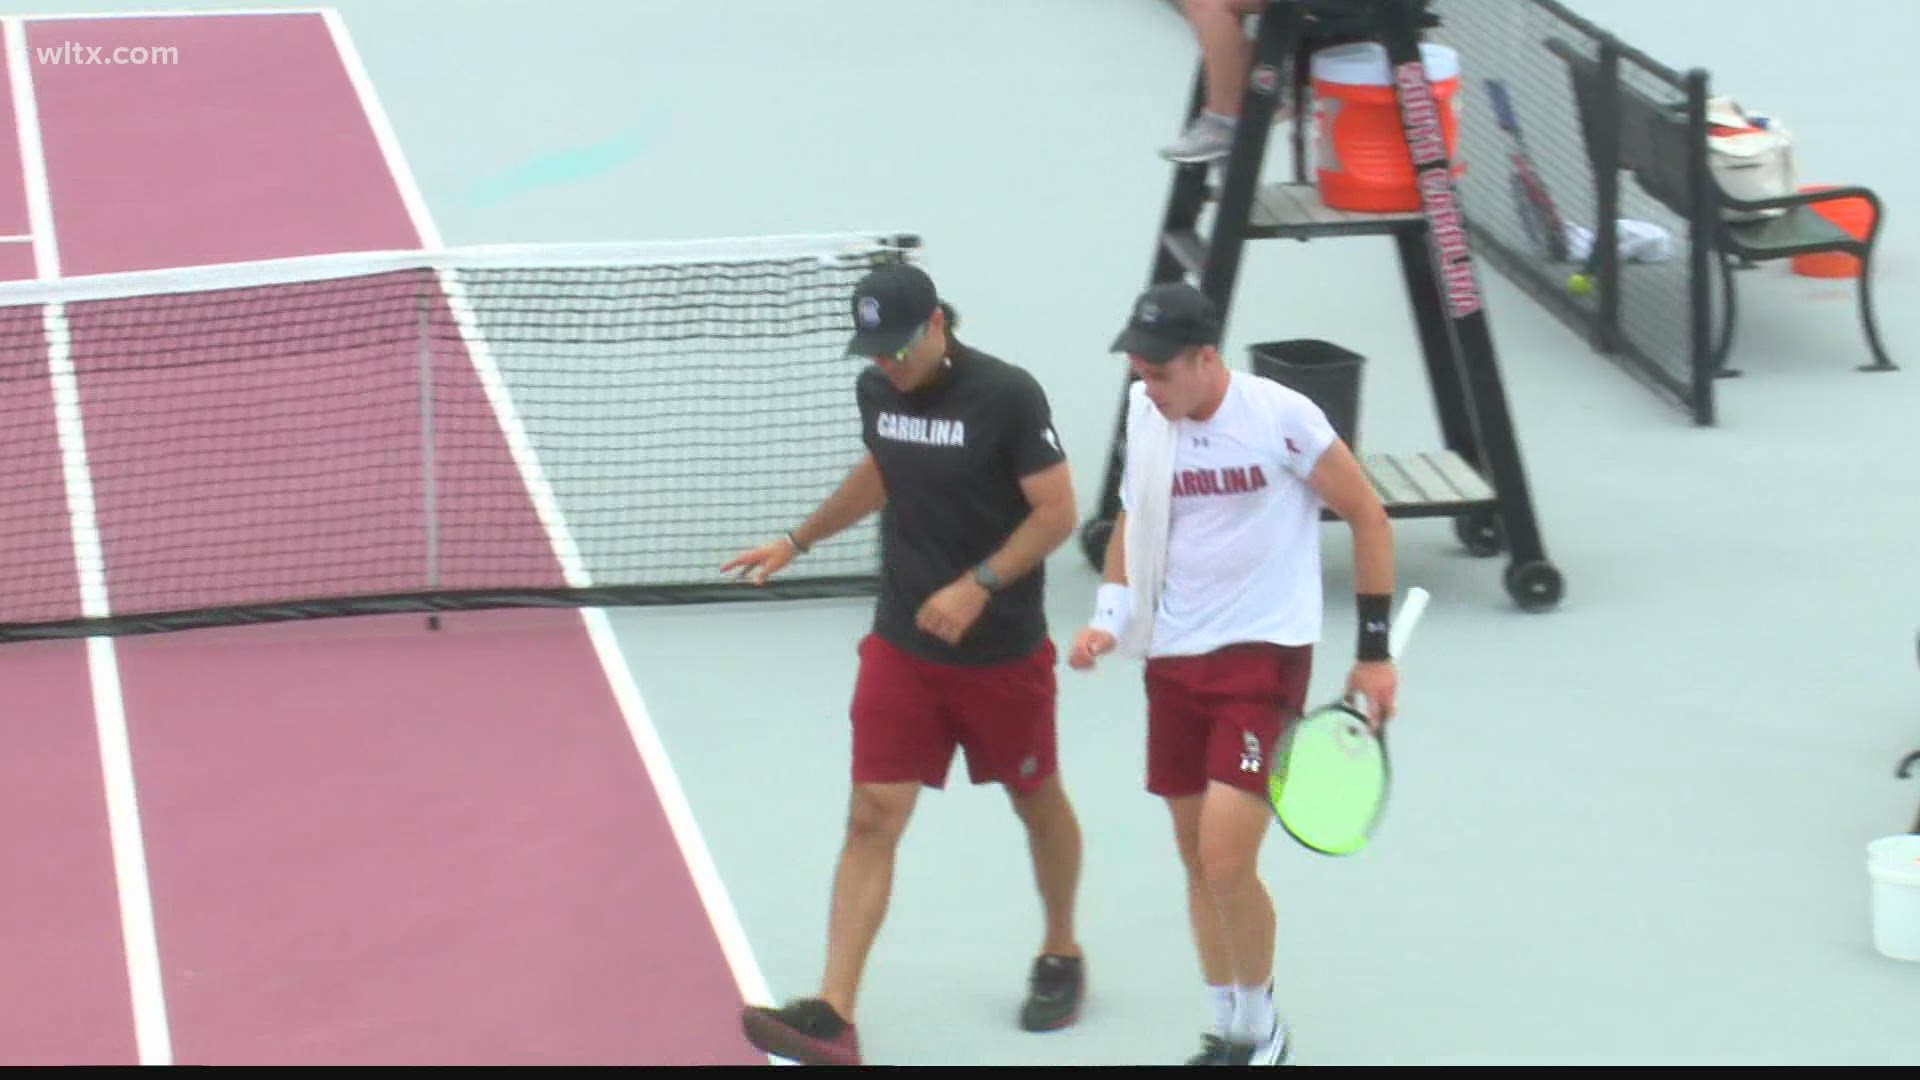 South Carolina sophomore Daniel Rodrigues had a stellar senior season which was followed by an runner-up finish in the NCAA singles championship.